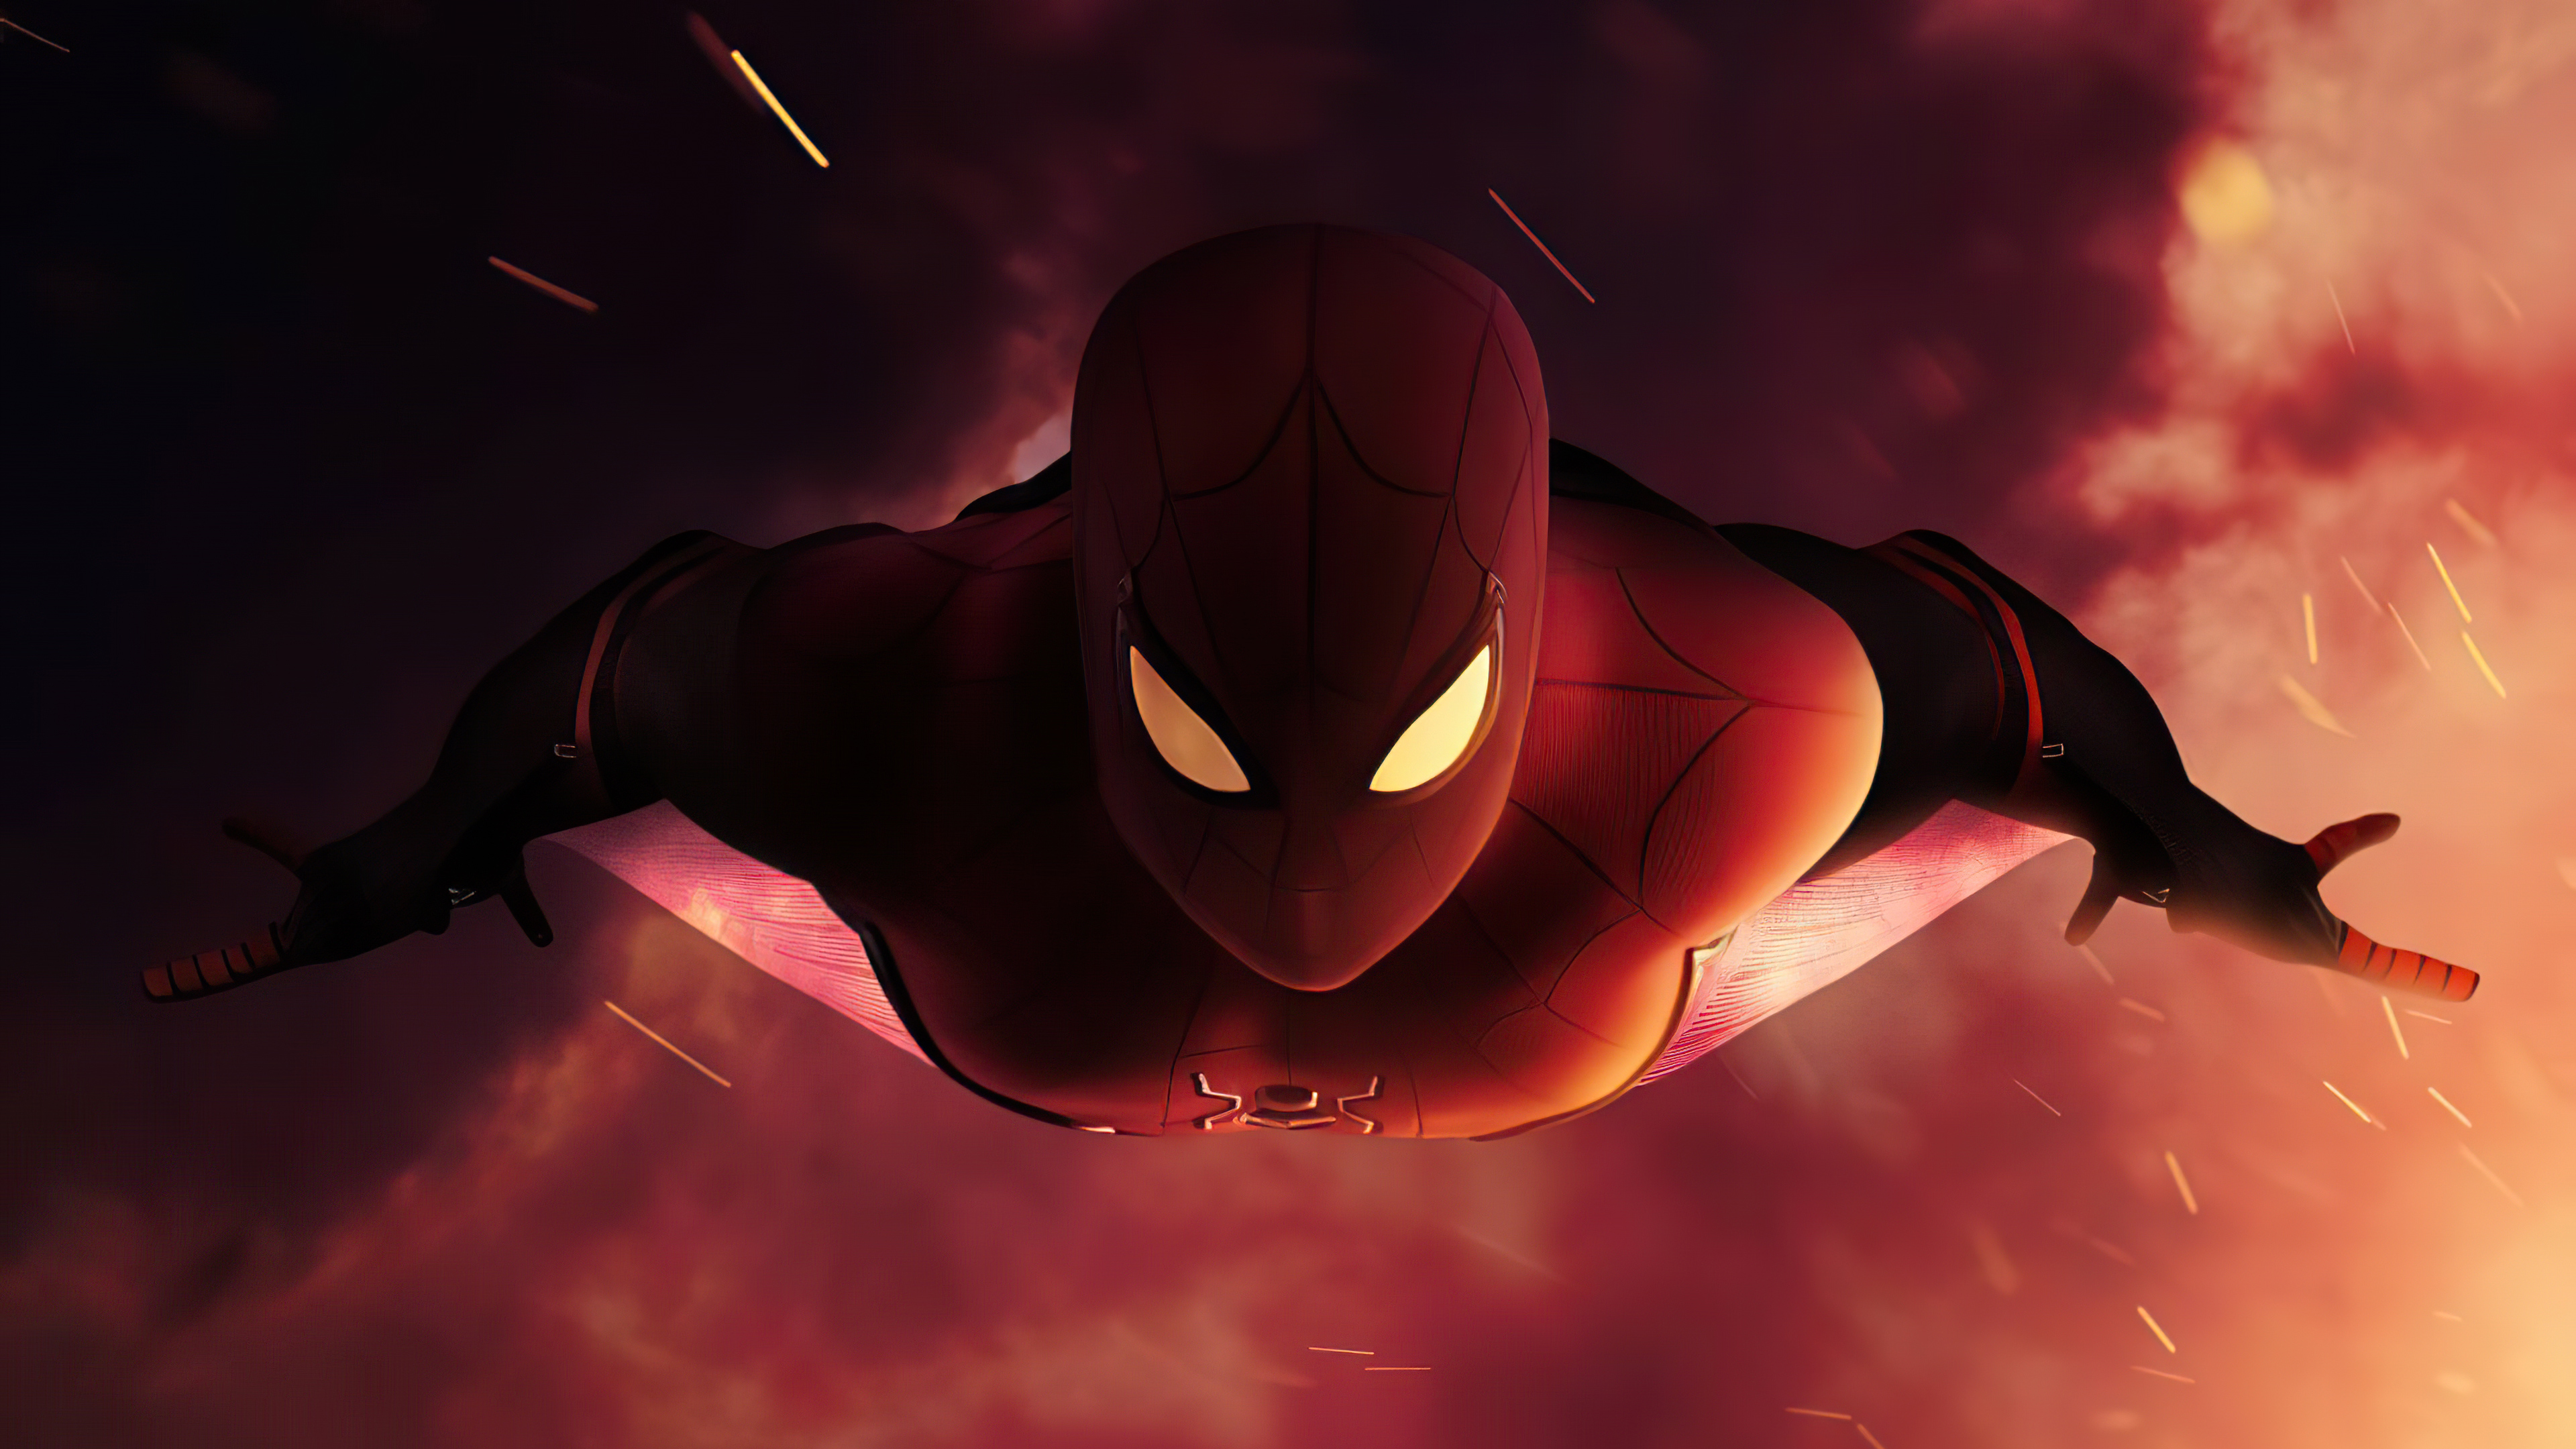 Spider-Man: Far From Home download the new version for ios